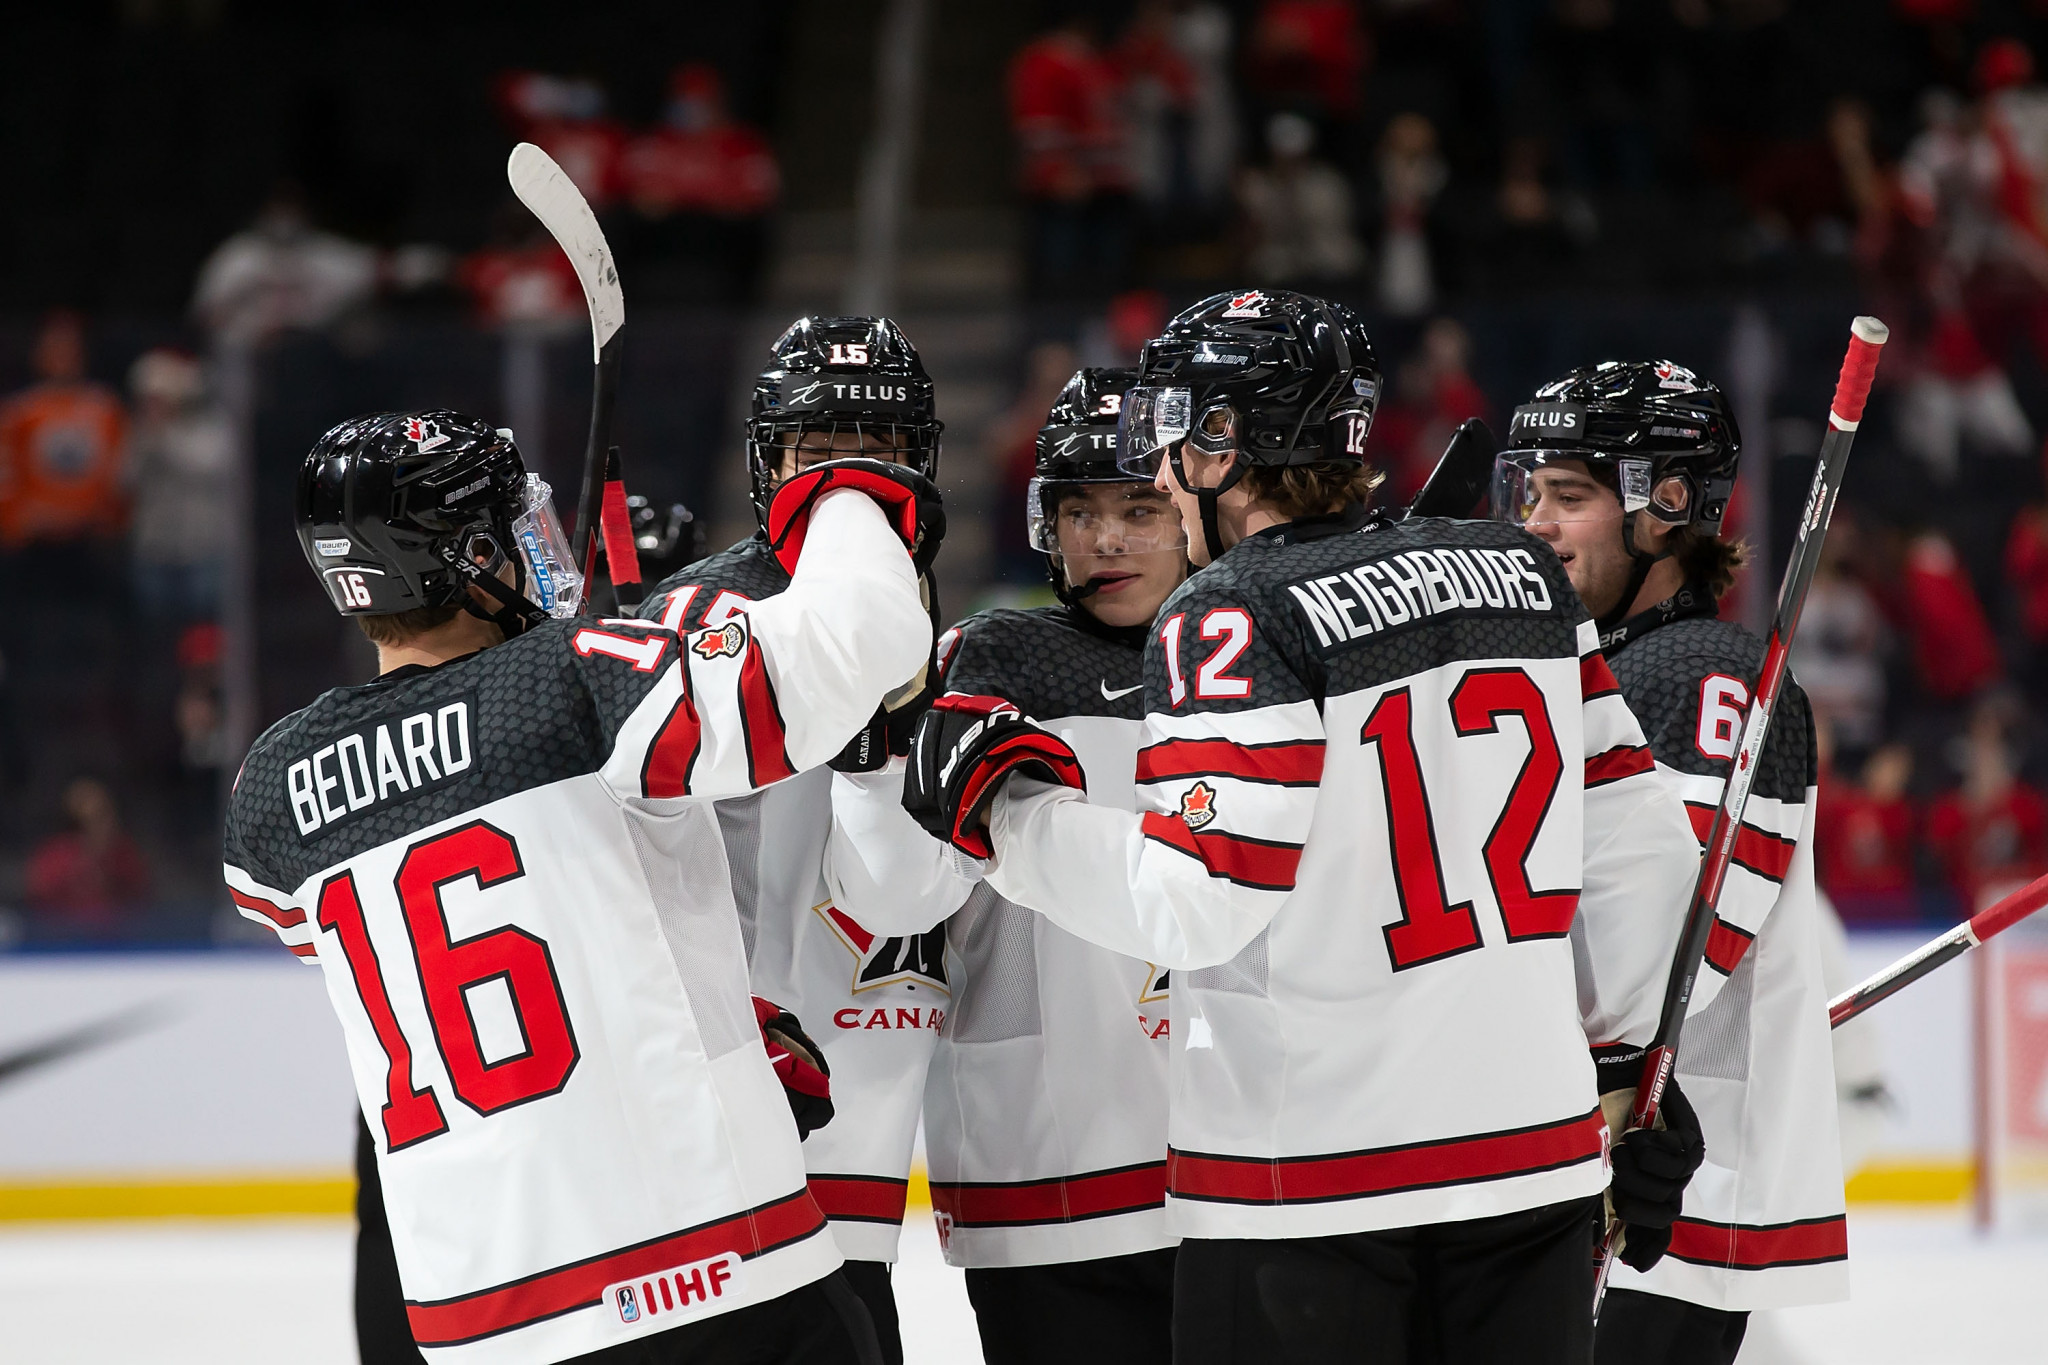 Groups revealed for IIHF World Junior Championship in Canada